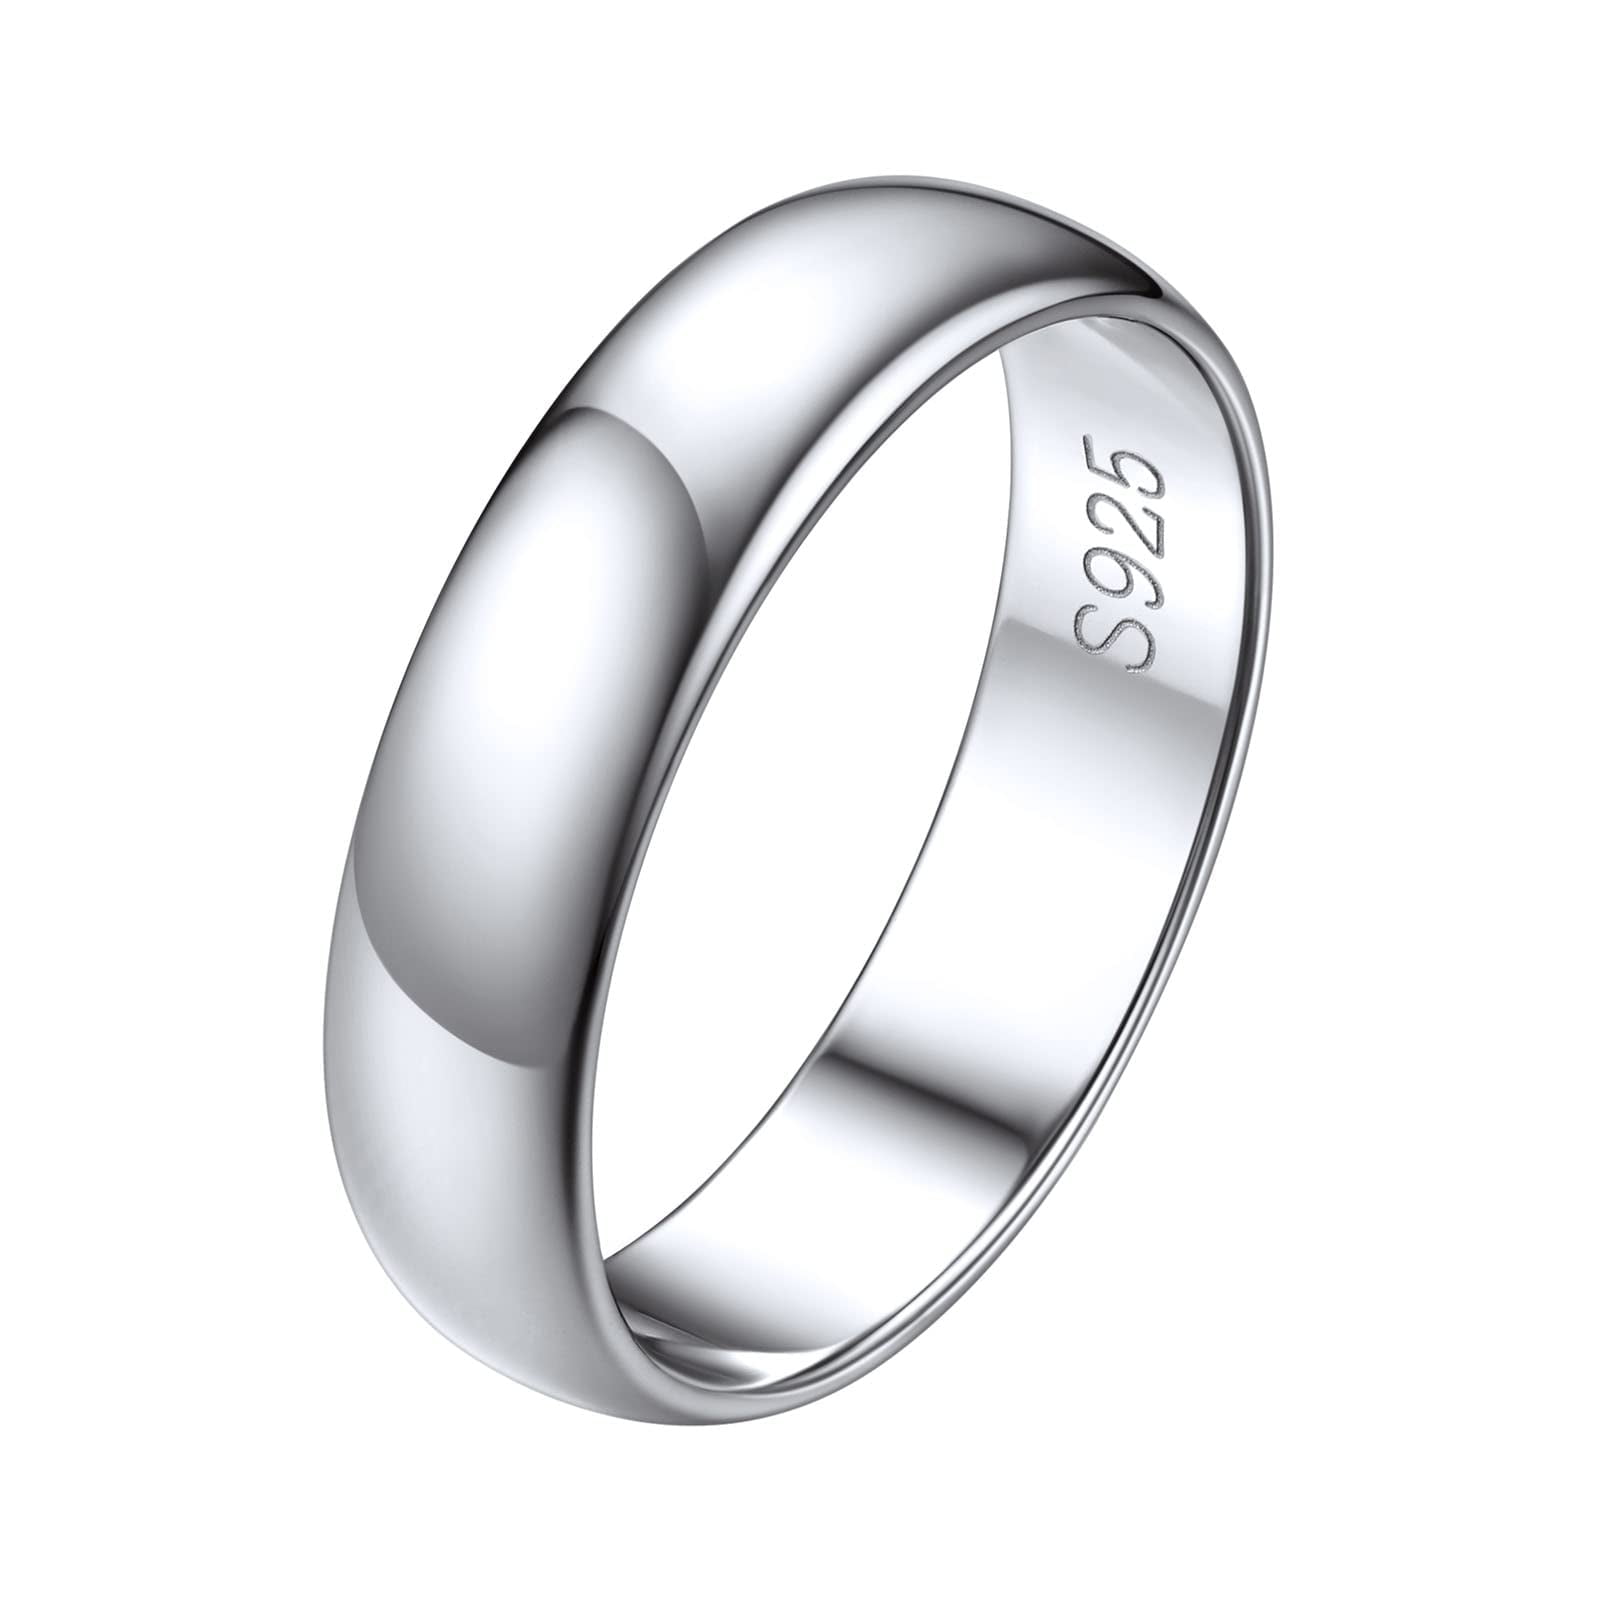 Buy quality latest om design men's sterling silver rings in Ahmedabad